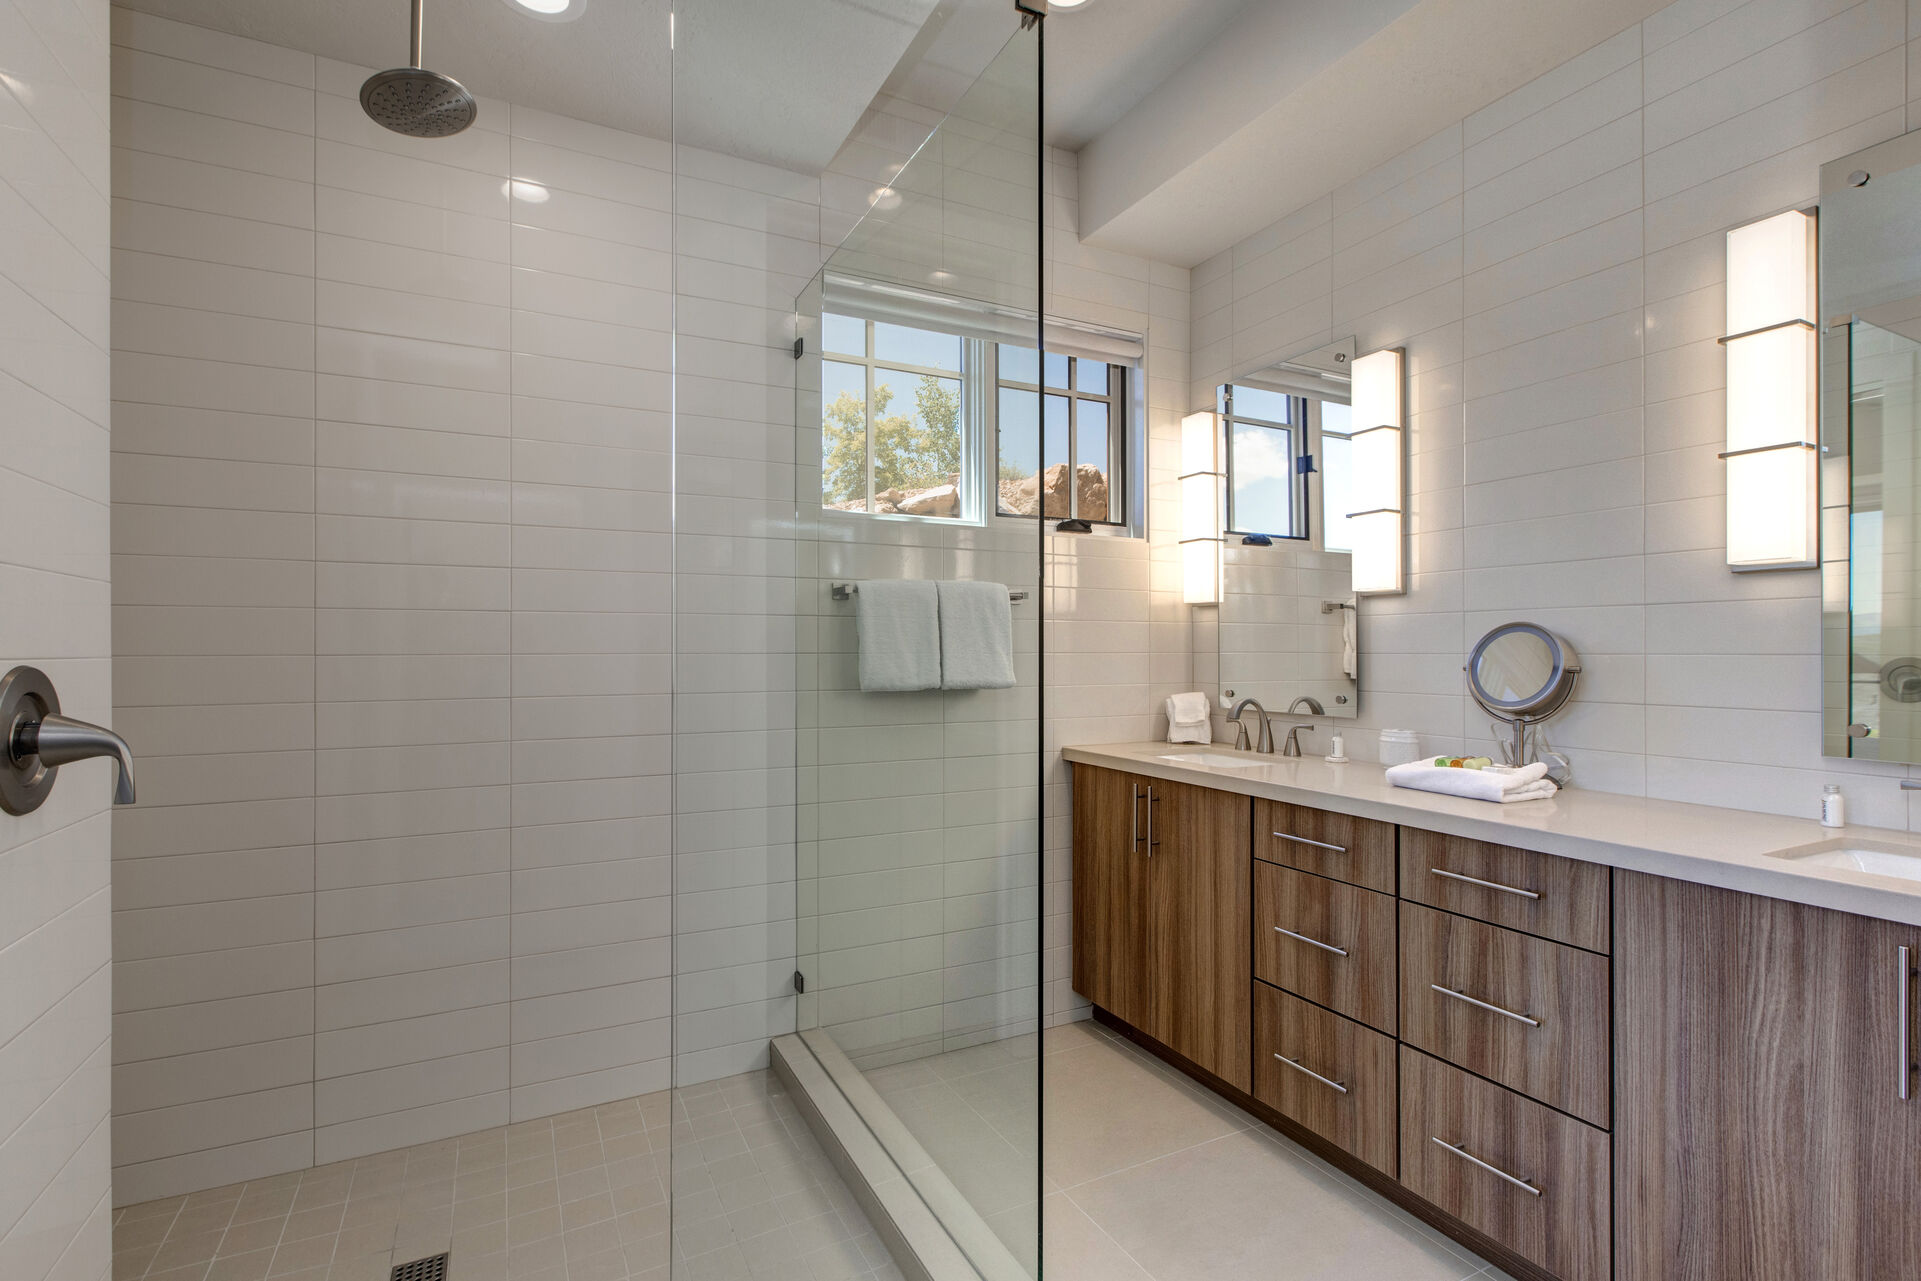 Master bathroom with large tiled shower, dual sinks, separate wash closet, and walk-in closet